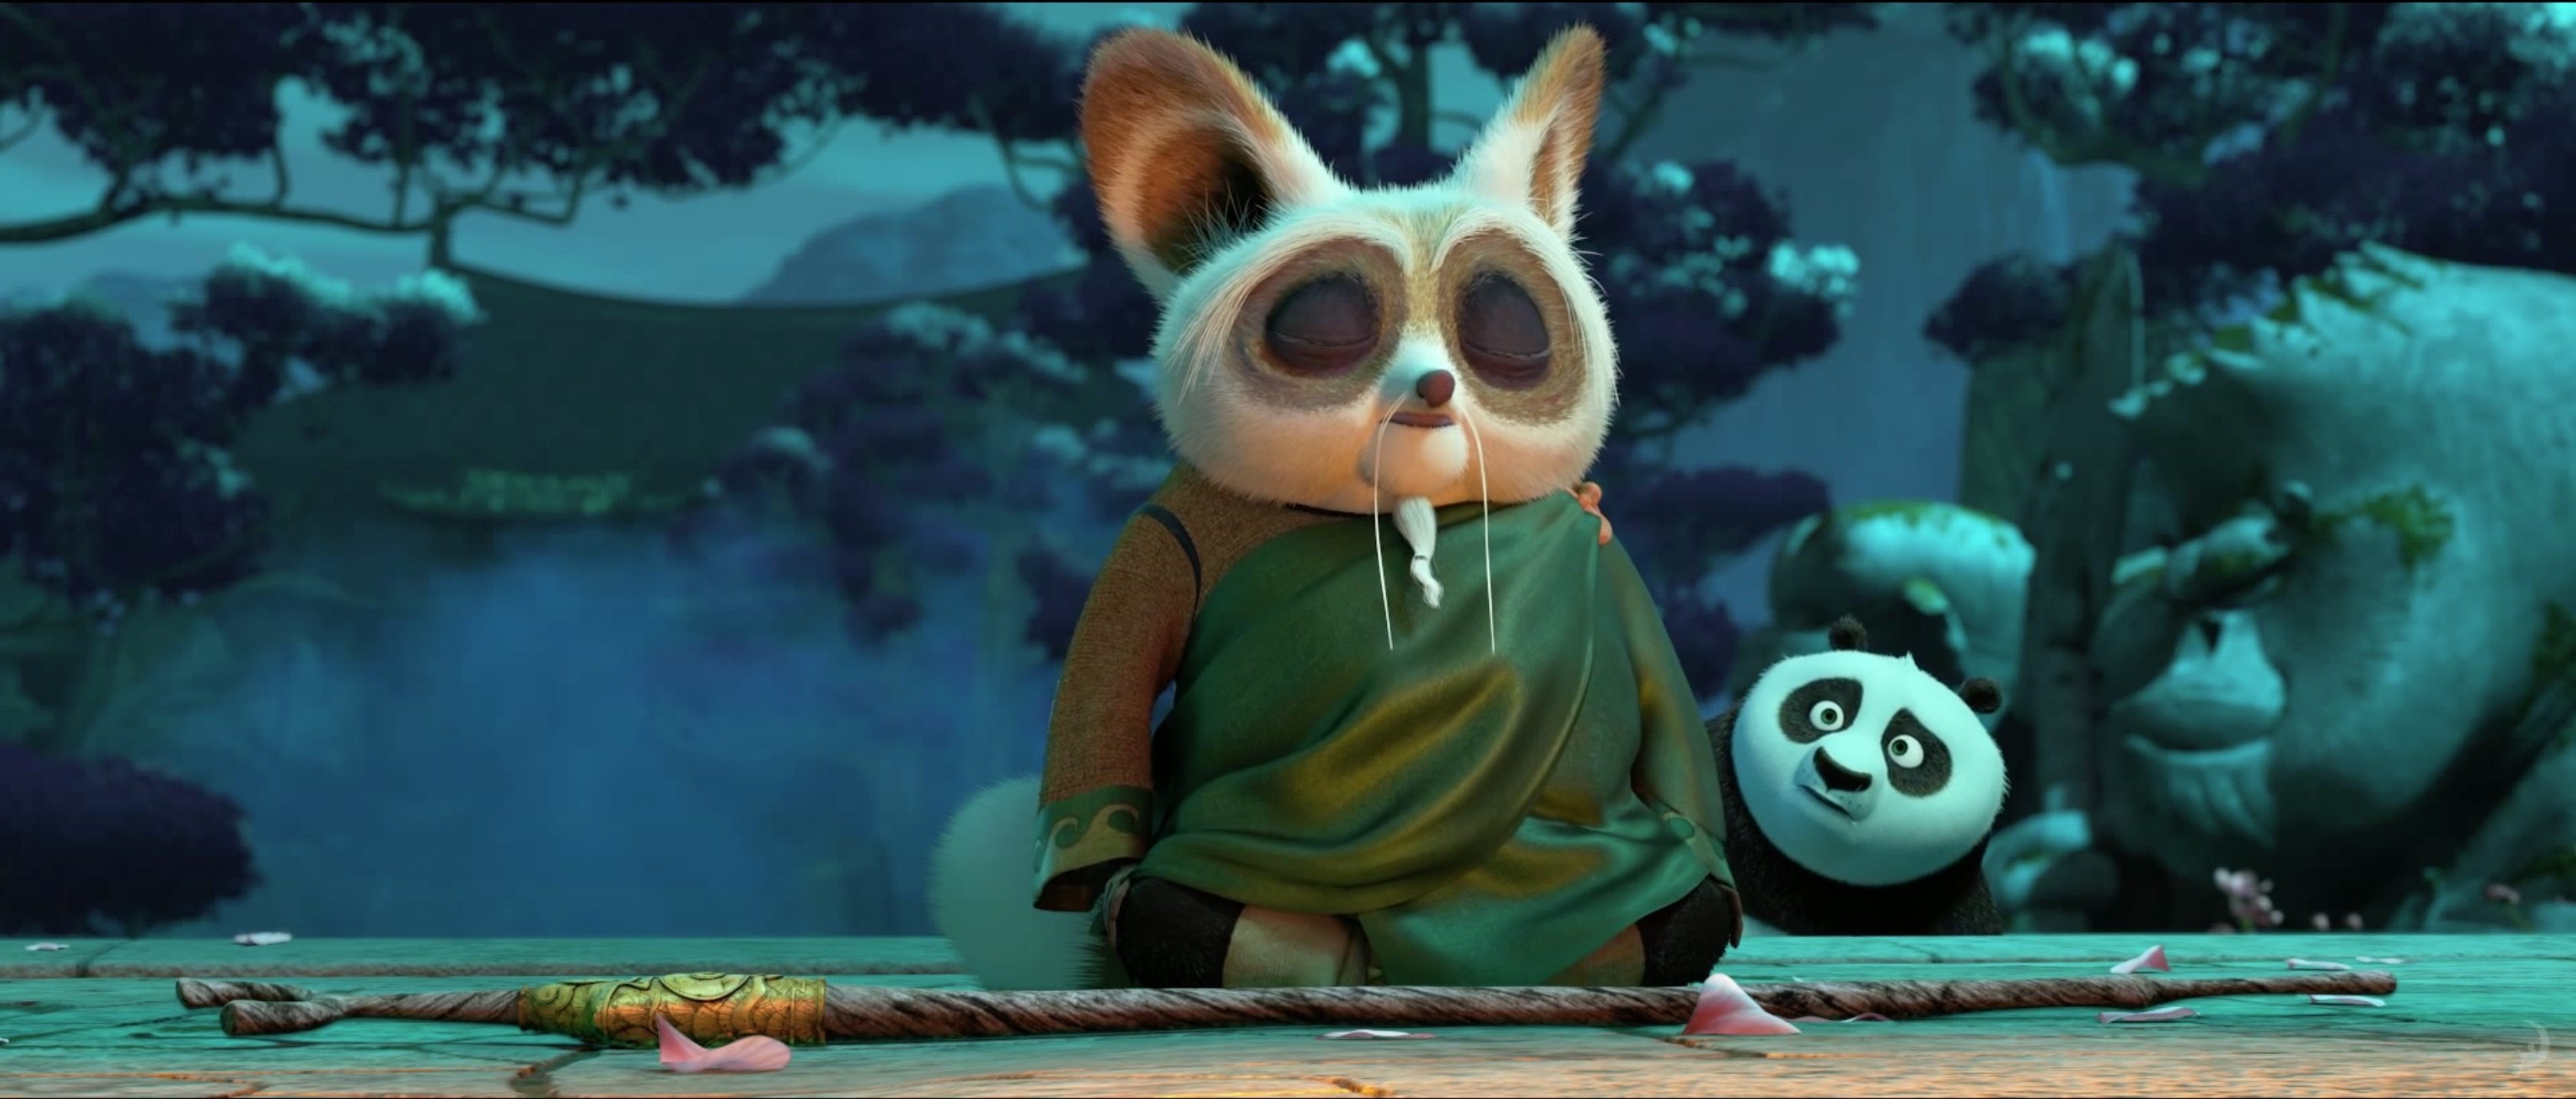 Master Shifu: Kung Fu Panda 3, Acts as both a friend and mentor to Po. 3360x1440 Dual Screen Background.